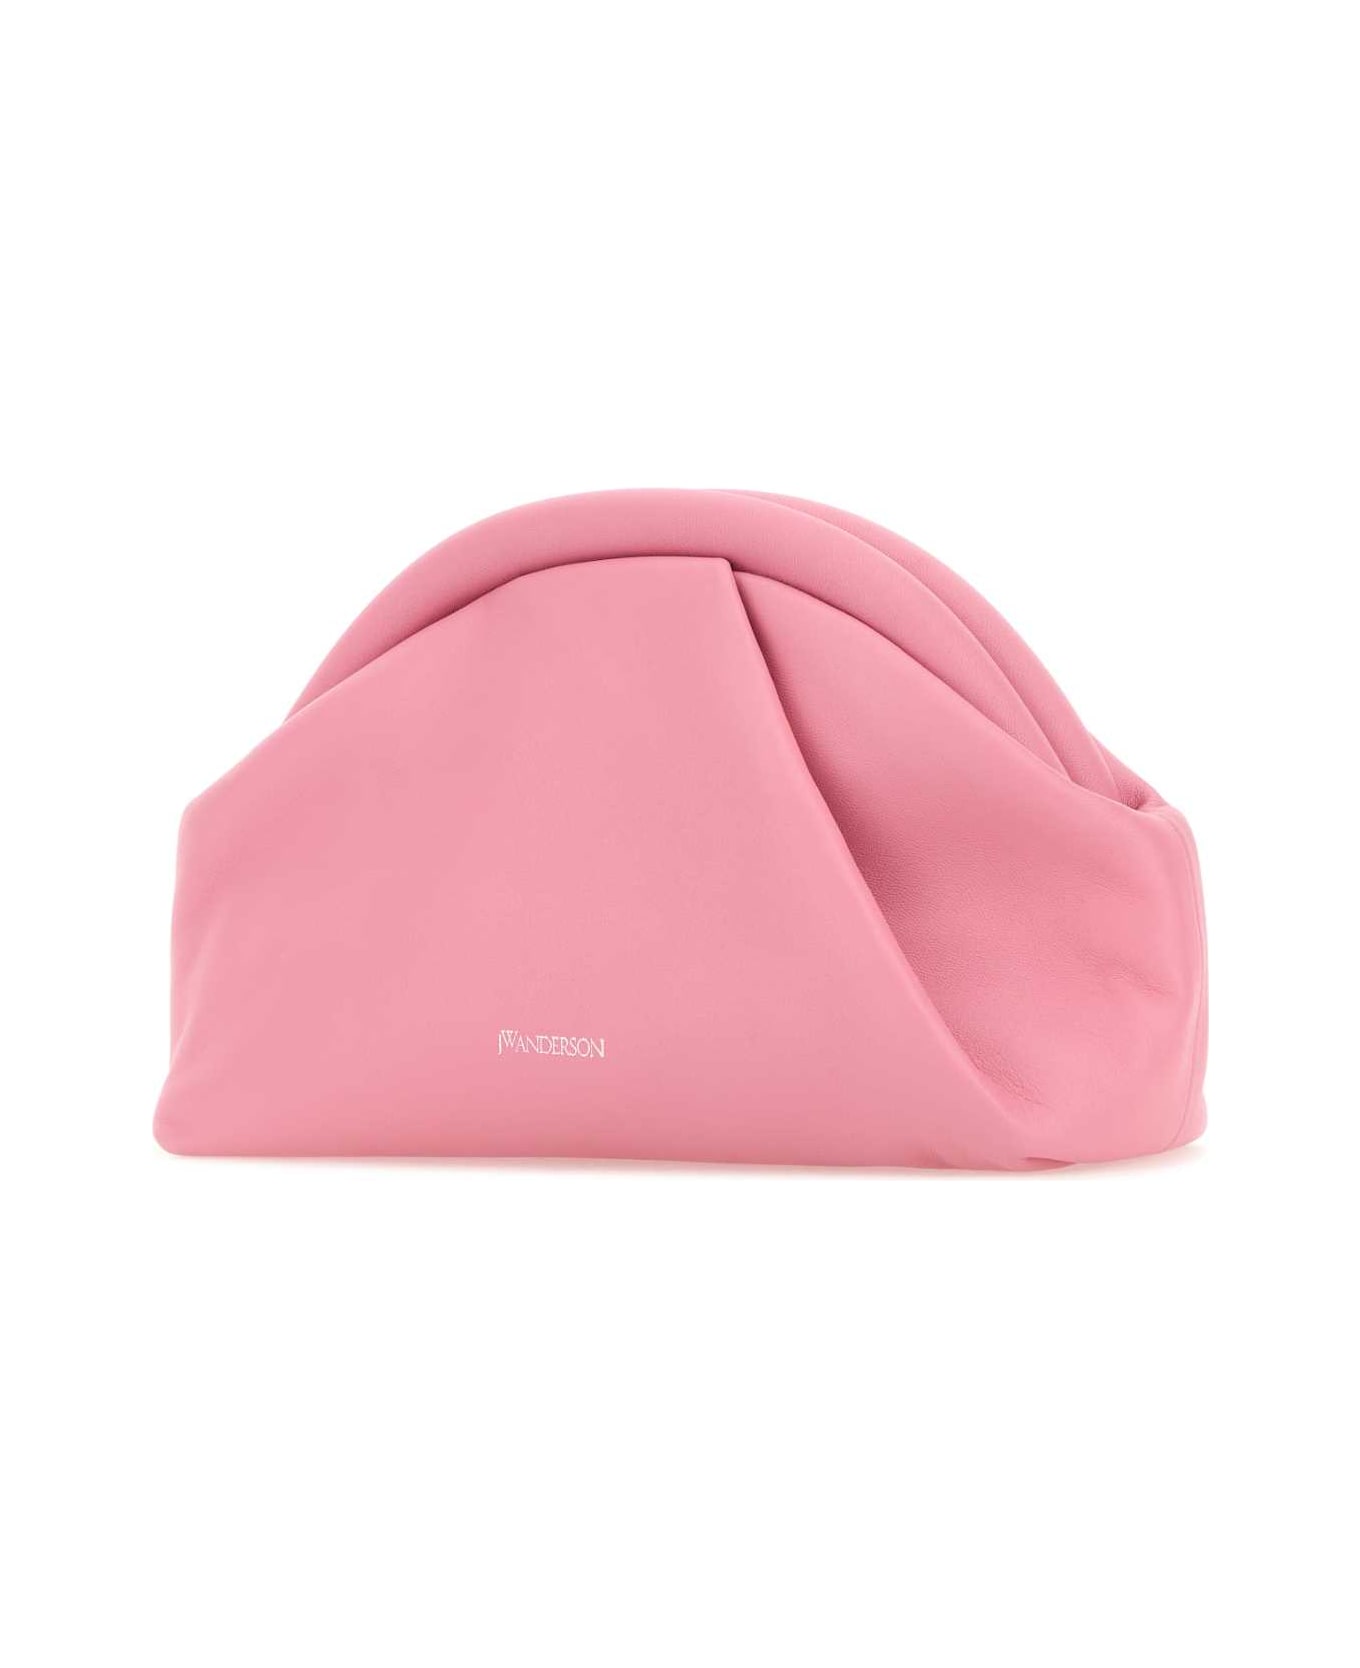 J.W. Anderson Pink Leather The Bumper Clutch - PINK クラッチバッグ